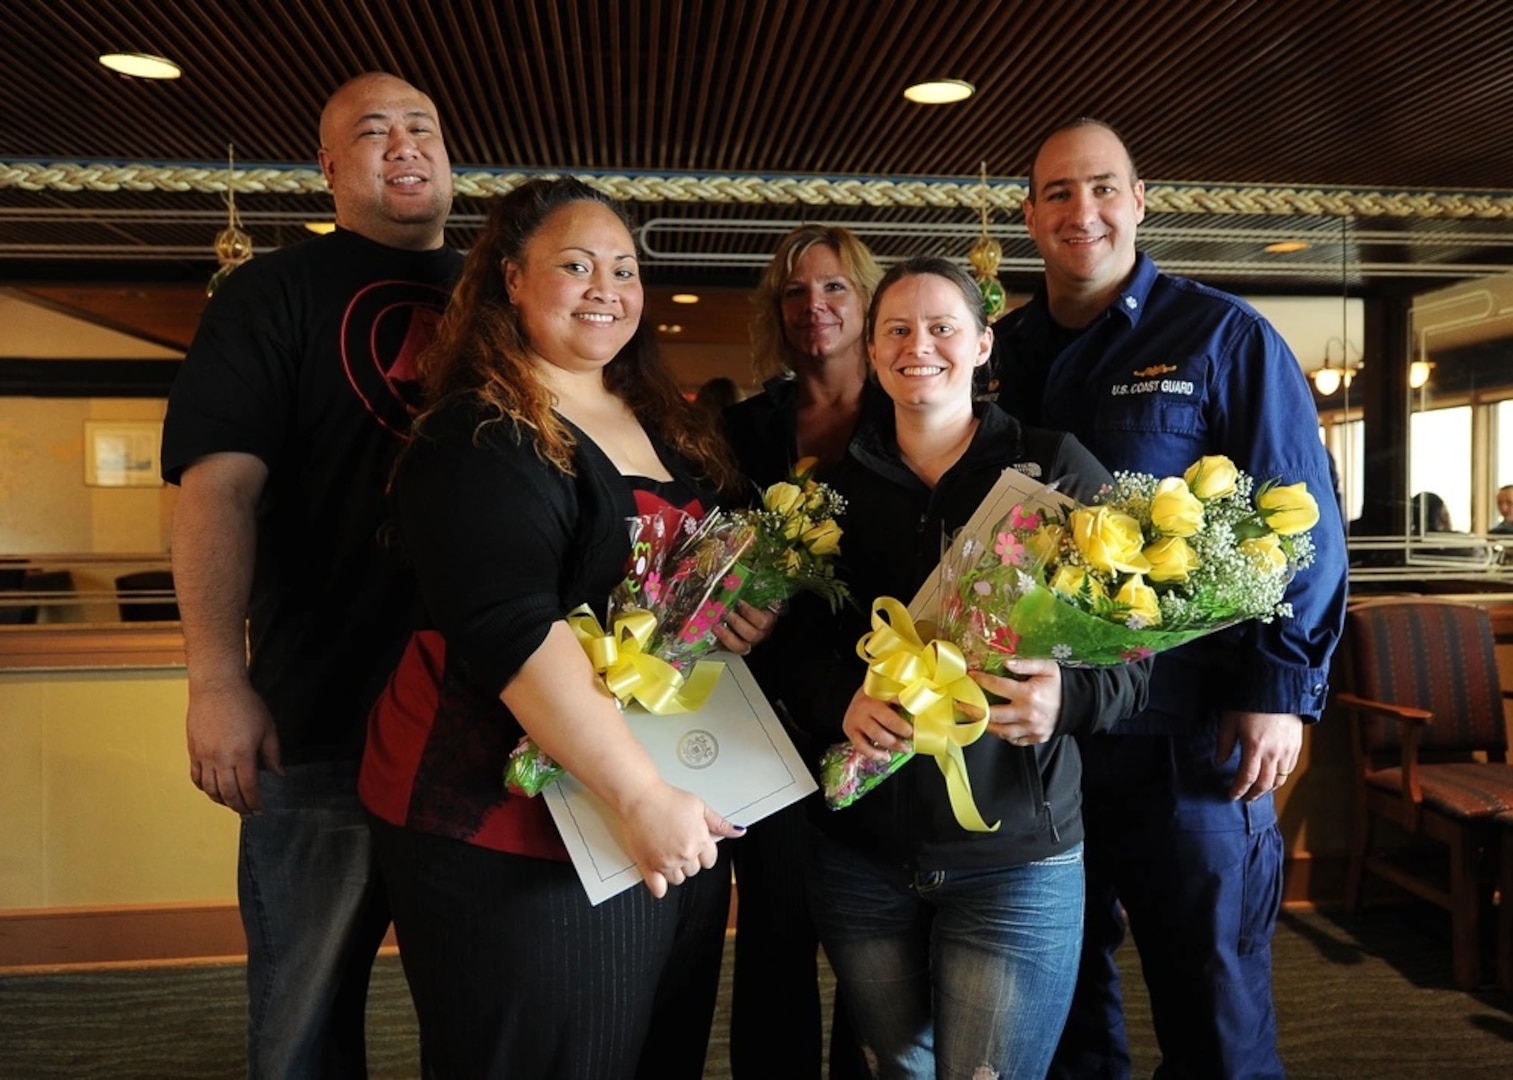 Caroline Leo and Holly Wilson, ombudsmen for Coast Guard Cutter Alex Haley, pause for a photo with their family and Cmdr. Stephen White, commanding officer of Alex Haley, during a luncheon in Kodiak, Alaska, April 4, 2014. The luncheon was held in honor of the ombudsmen who help Coast Guard families have the information necessary to meet the challenges of a military lifestyle. (U.S. Coast Guard photo by Petty Officer 3rd Class Diana Honings)